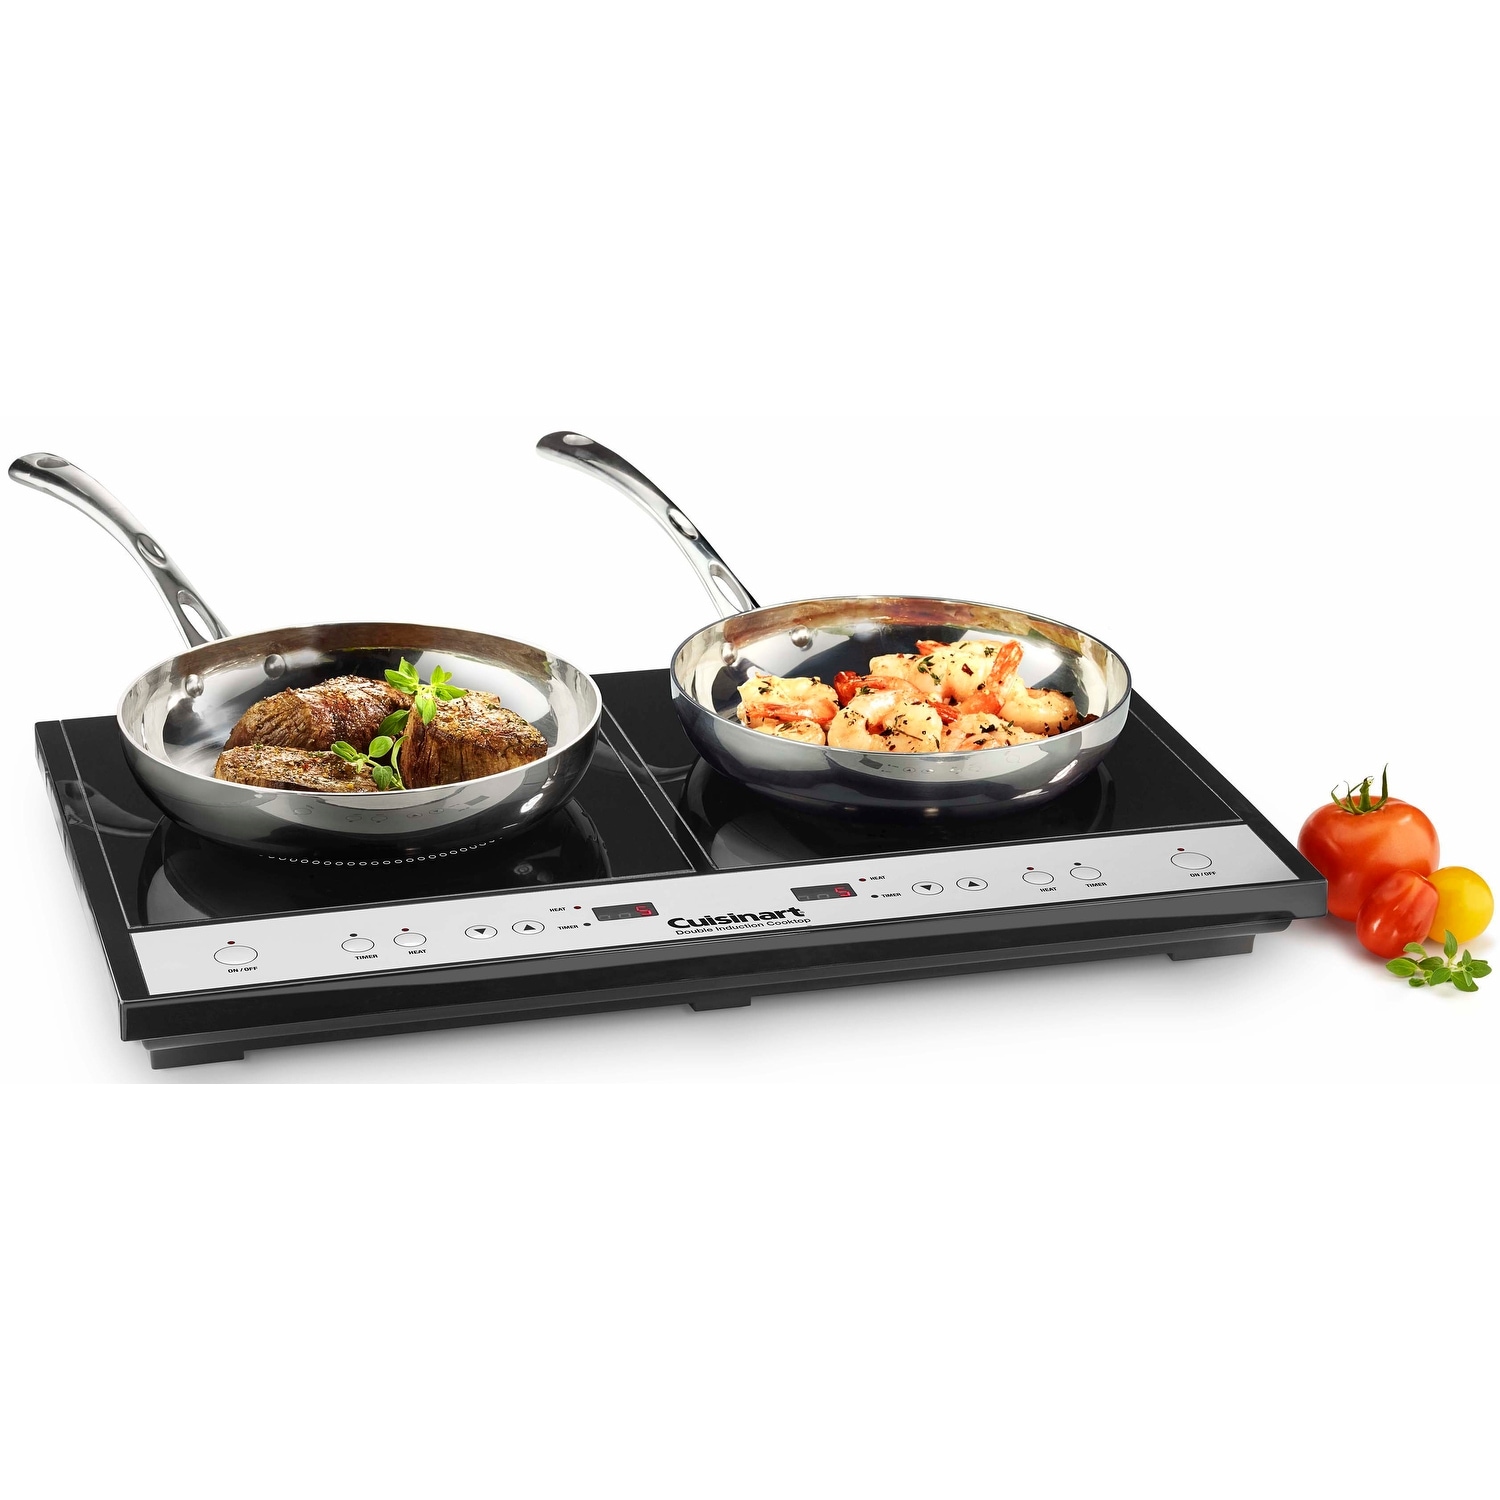 Cuisinart ICT-60P1 Double Induction Cooktop - Double cooktop - Bed